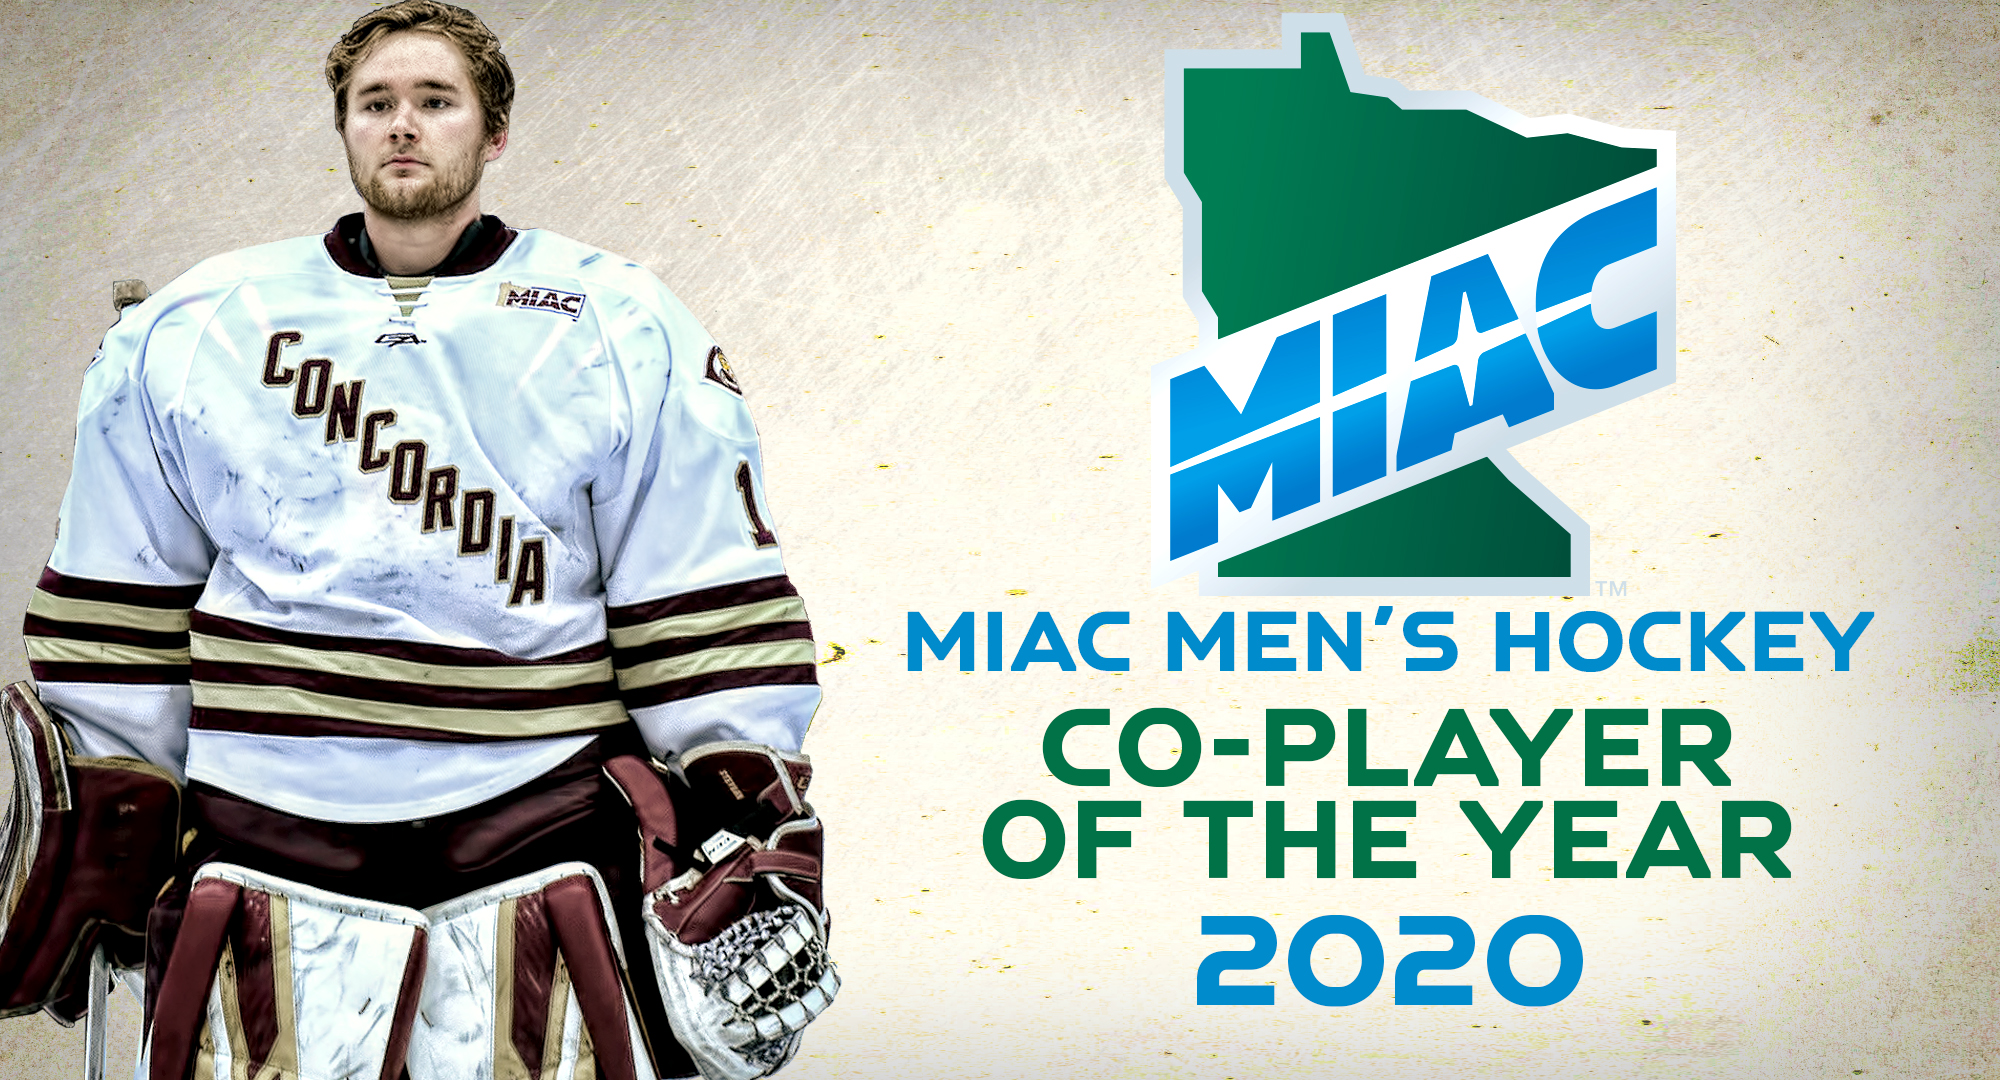 Senior goalie Jacob Stephan led the conference in goals against average, save percentage and winning percentage and was named the MIAC Co-Player of the Year.